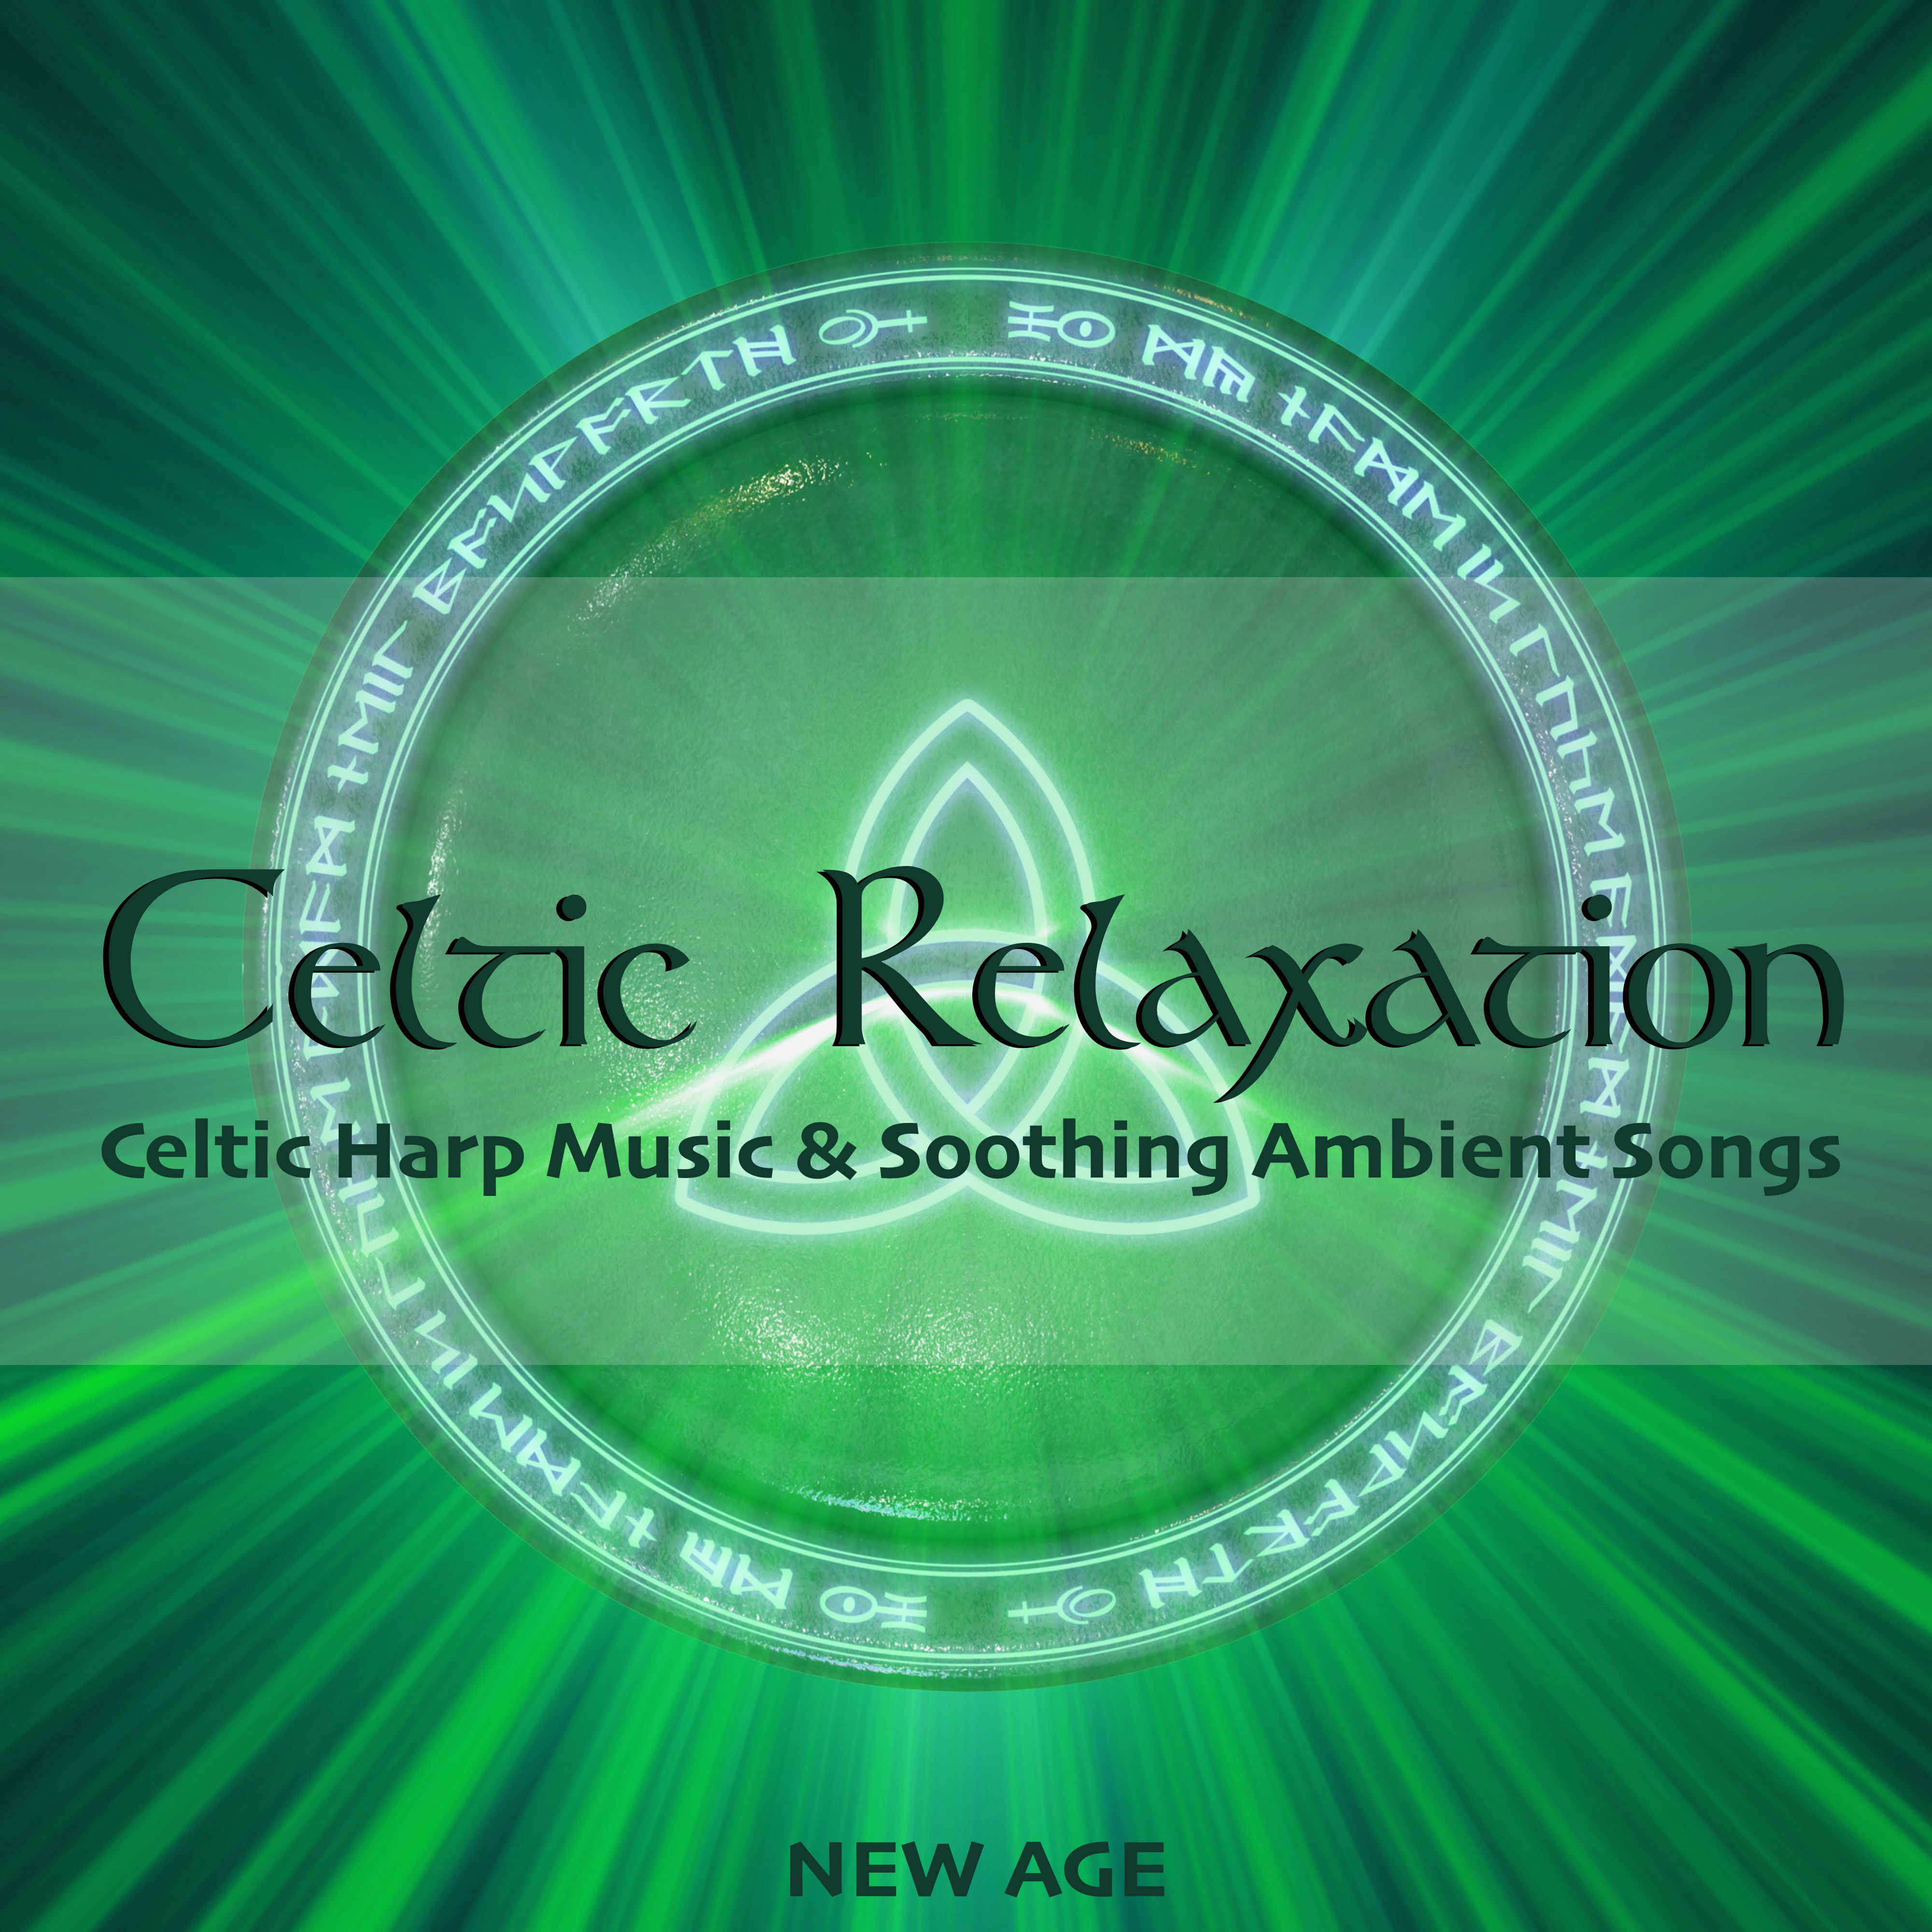 Celtic Relaxation - Celtic Harp Music & Soothing Ambient Songs